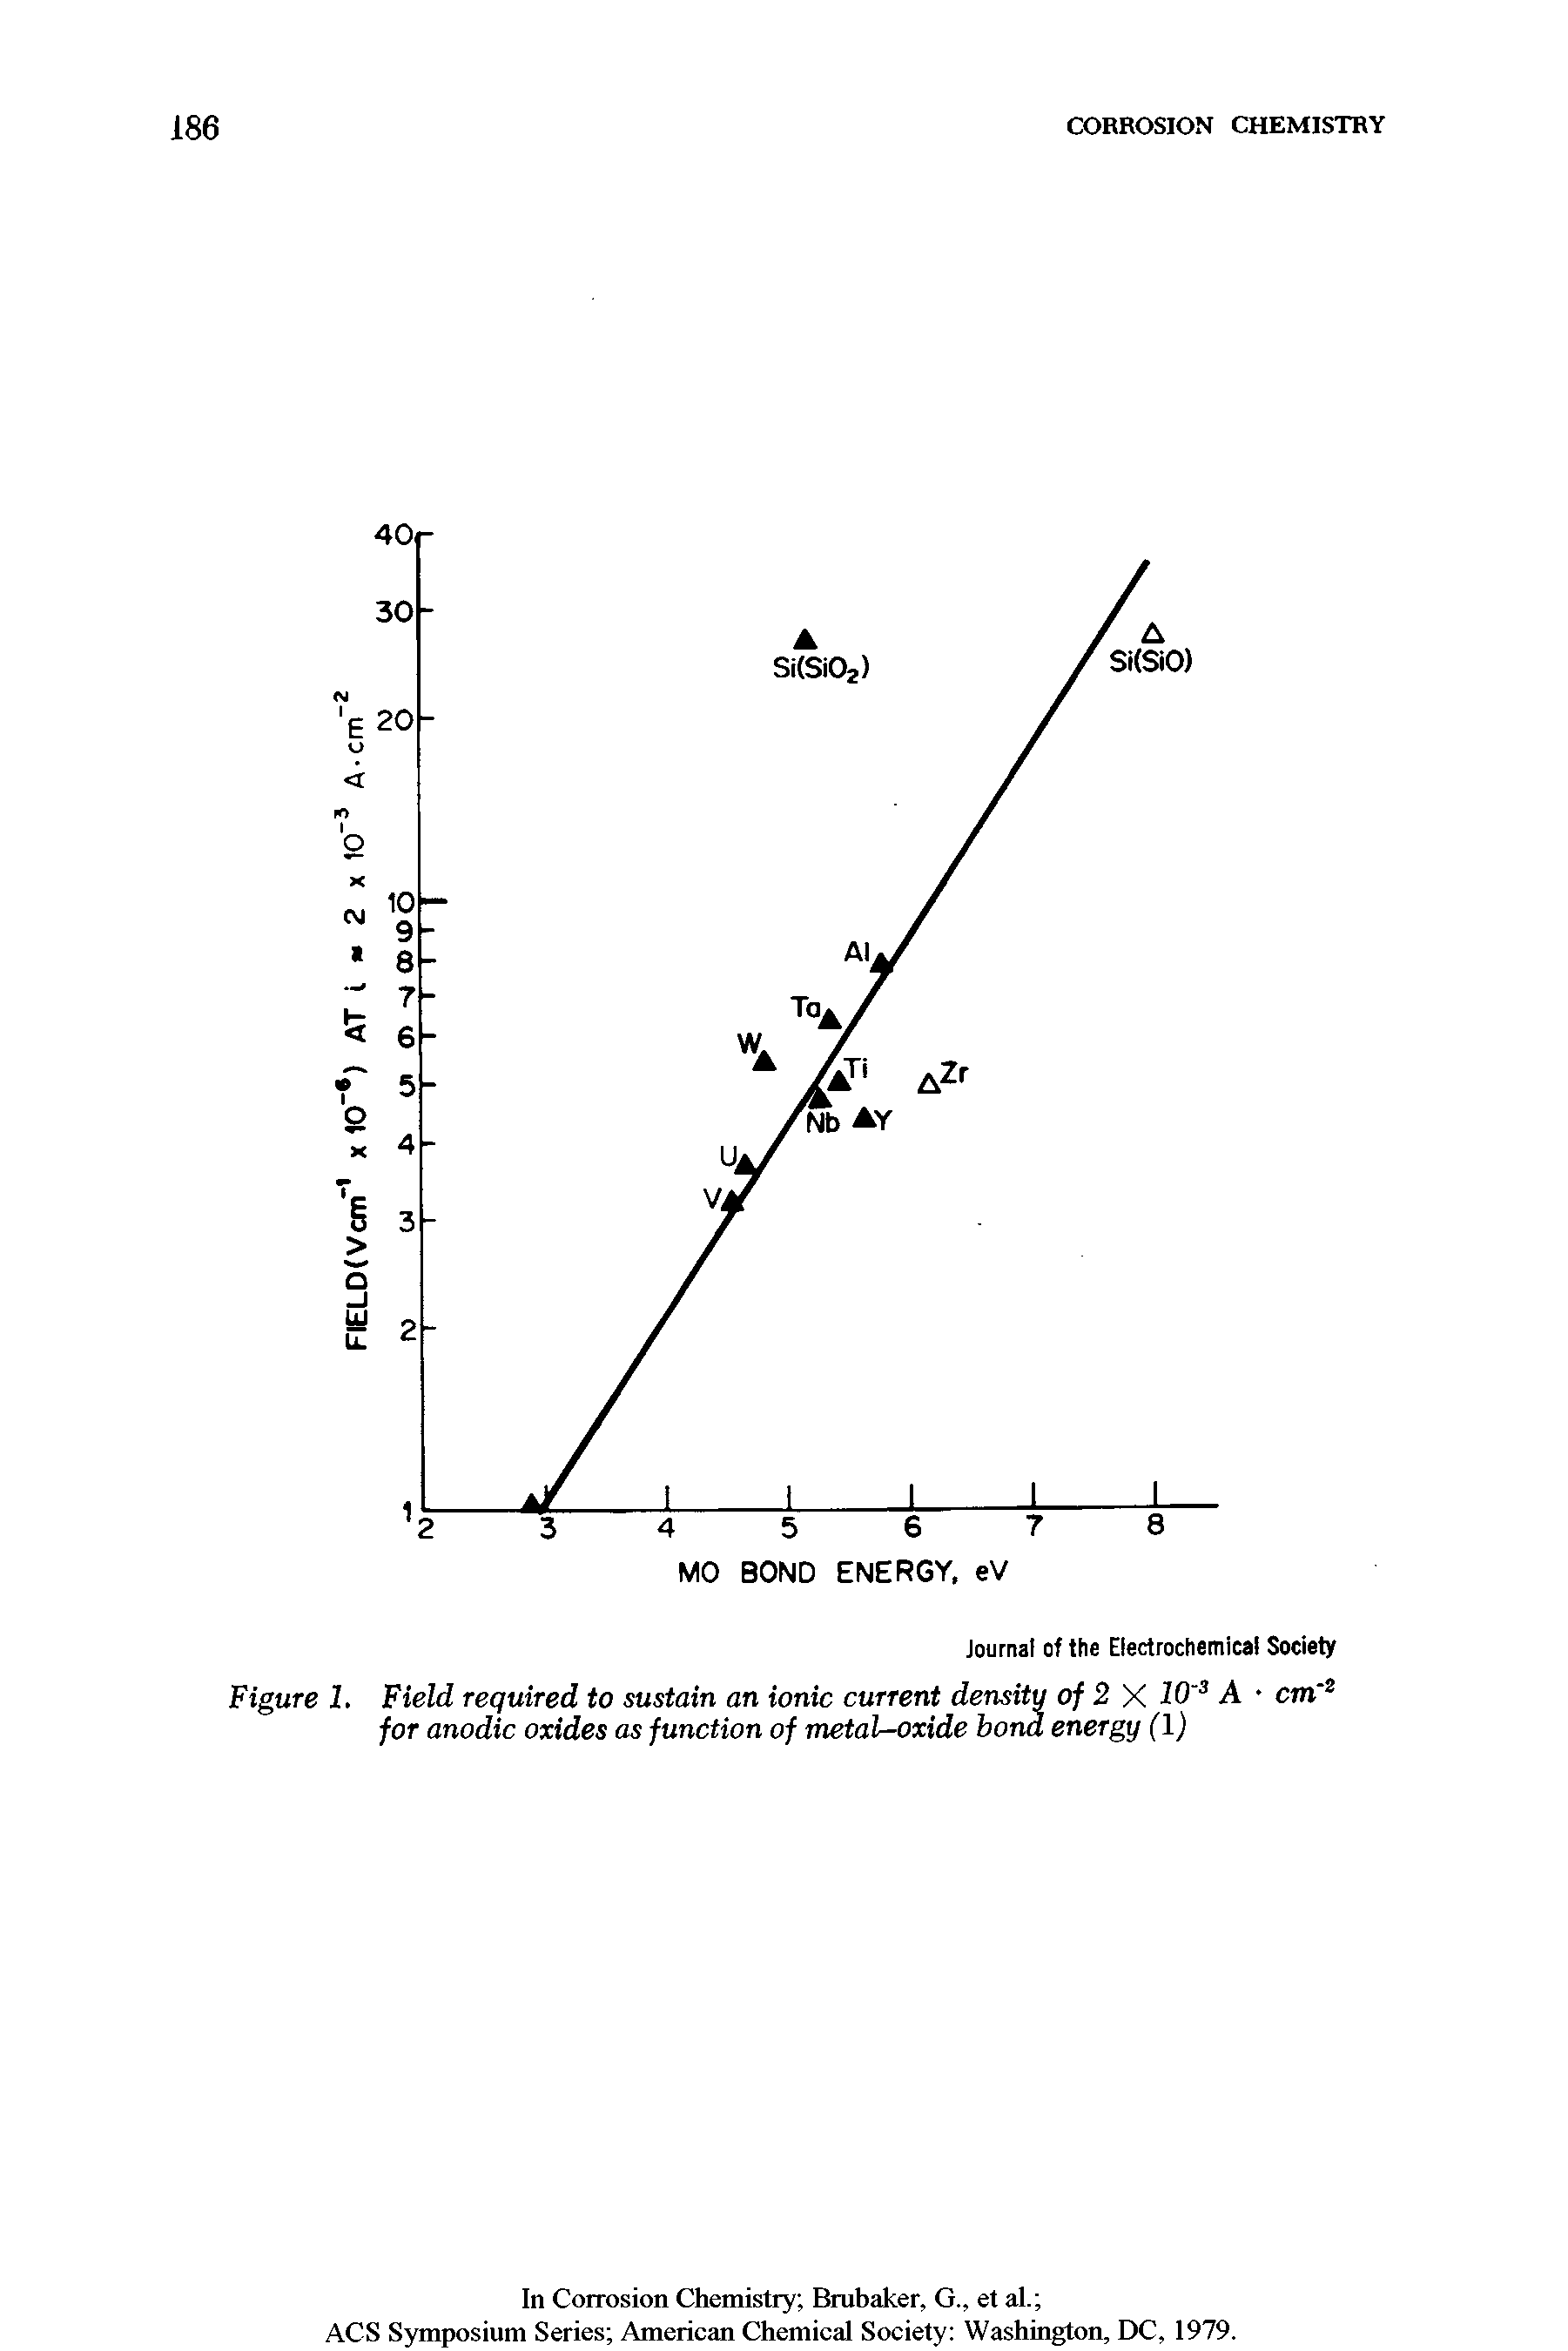 Figure 1. Field required to sustain an ionic current density of 2 X 10 A cm for anodic oxides as function of metal-oxide bond energy (1)...